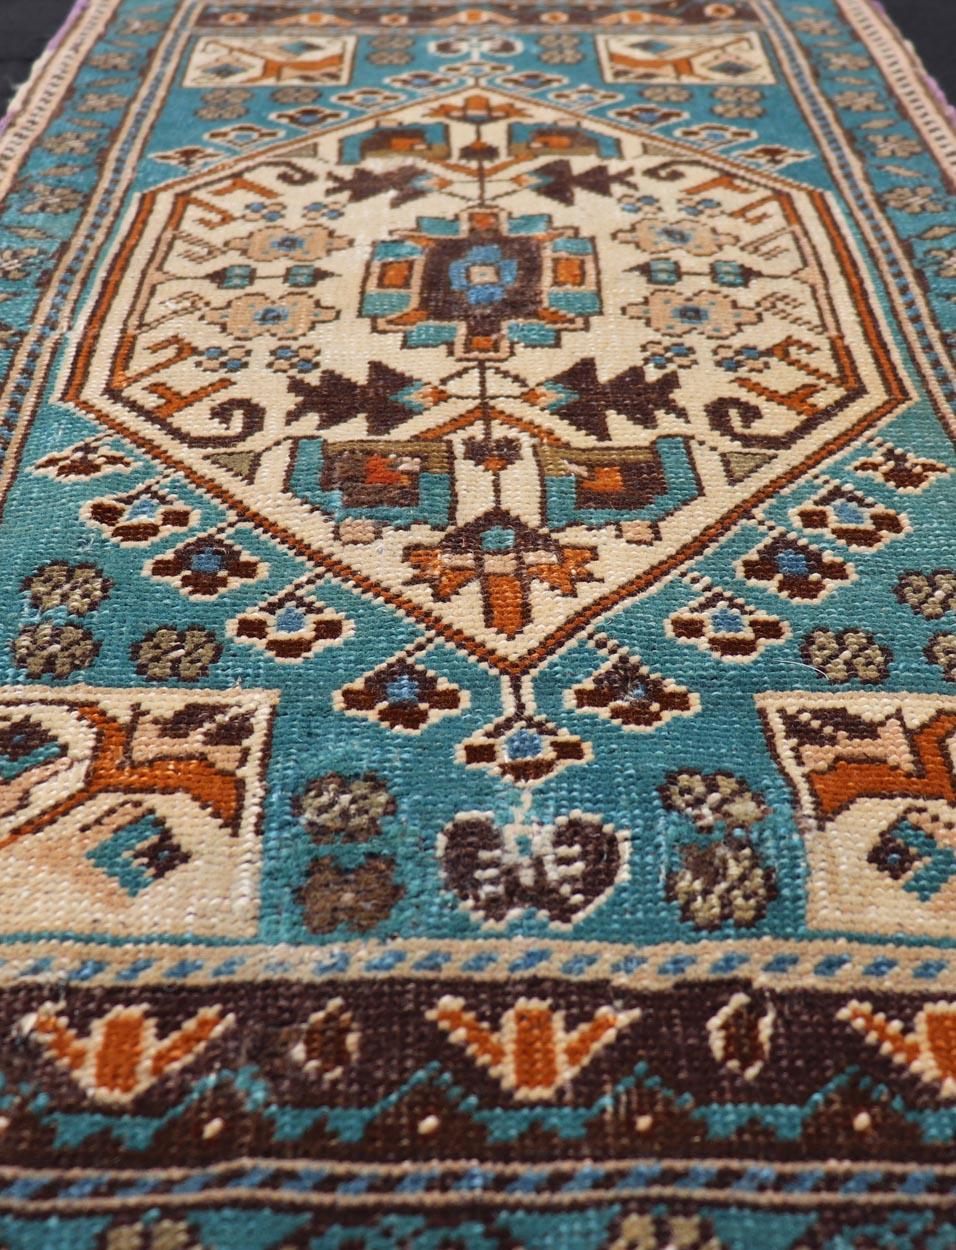 Vintage Turkish Oushak Rug in Teal Color with Geometric Medallion Design, Keivan Woven Arts / rug/ EN-15920, country of origin / type: Turkey / Oushak, circa 1950

Measures: 1'10 x 3'6 

Small Turkish small size in teal and multi colors with